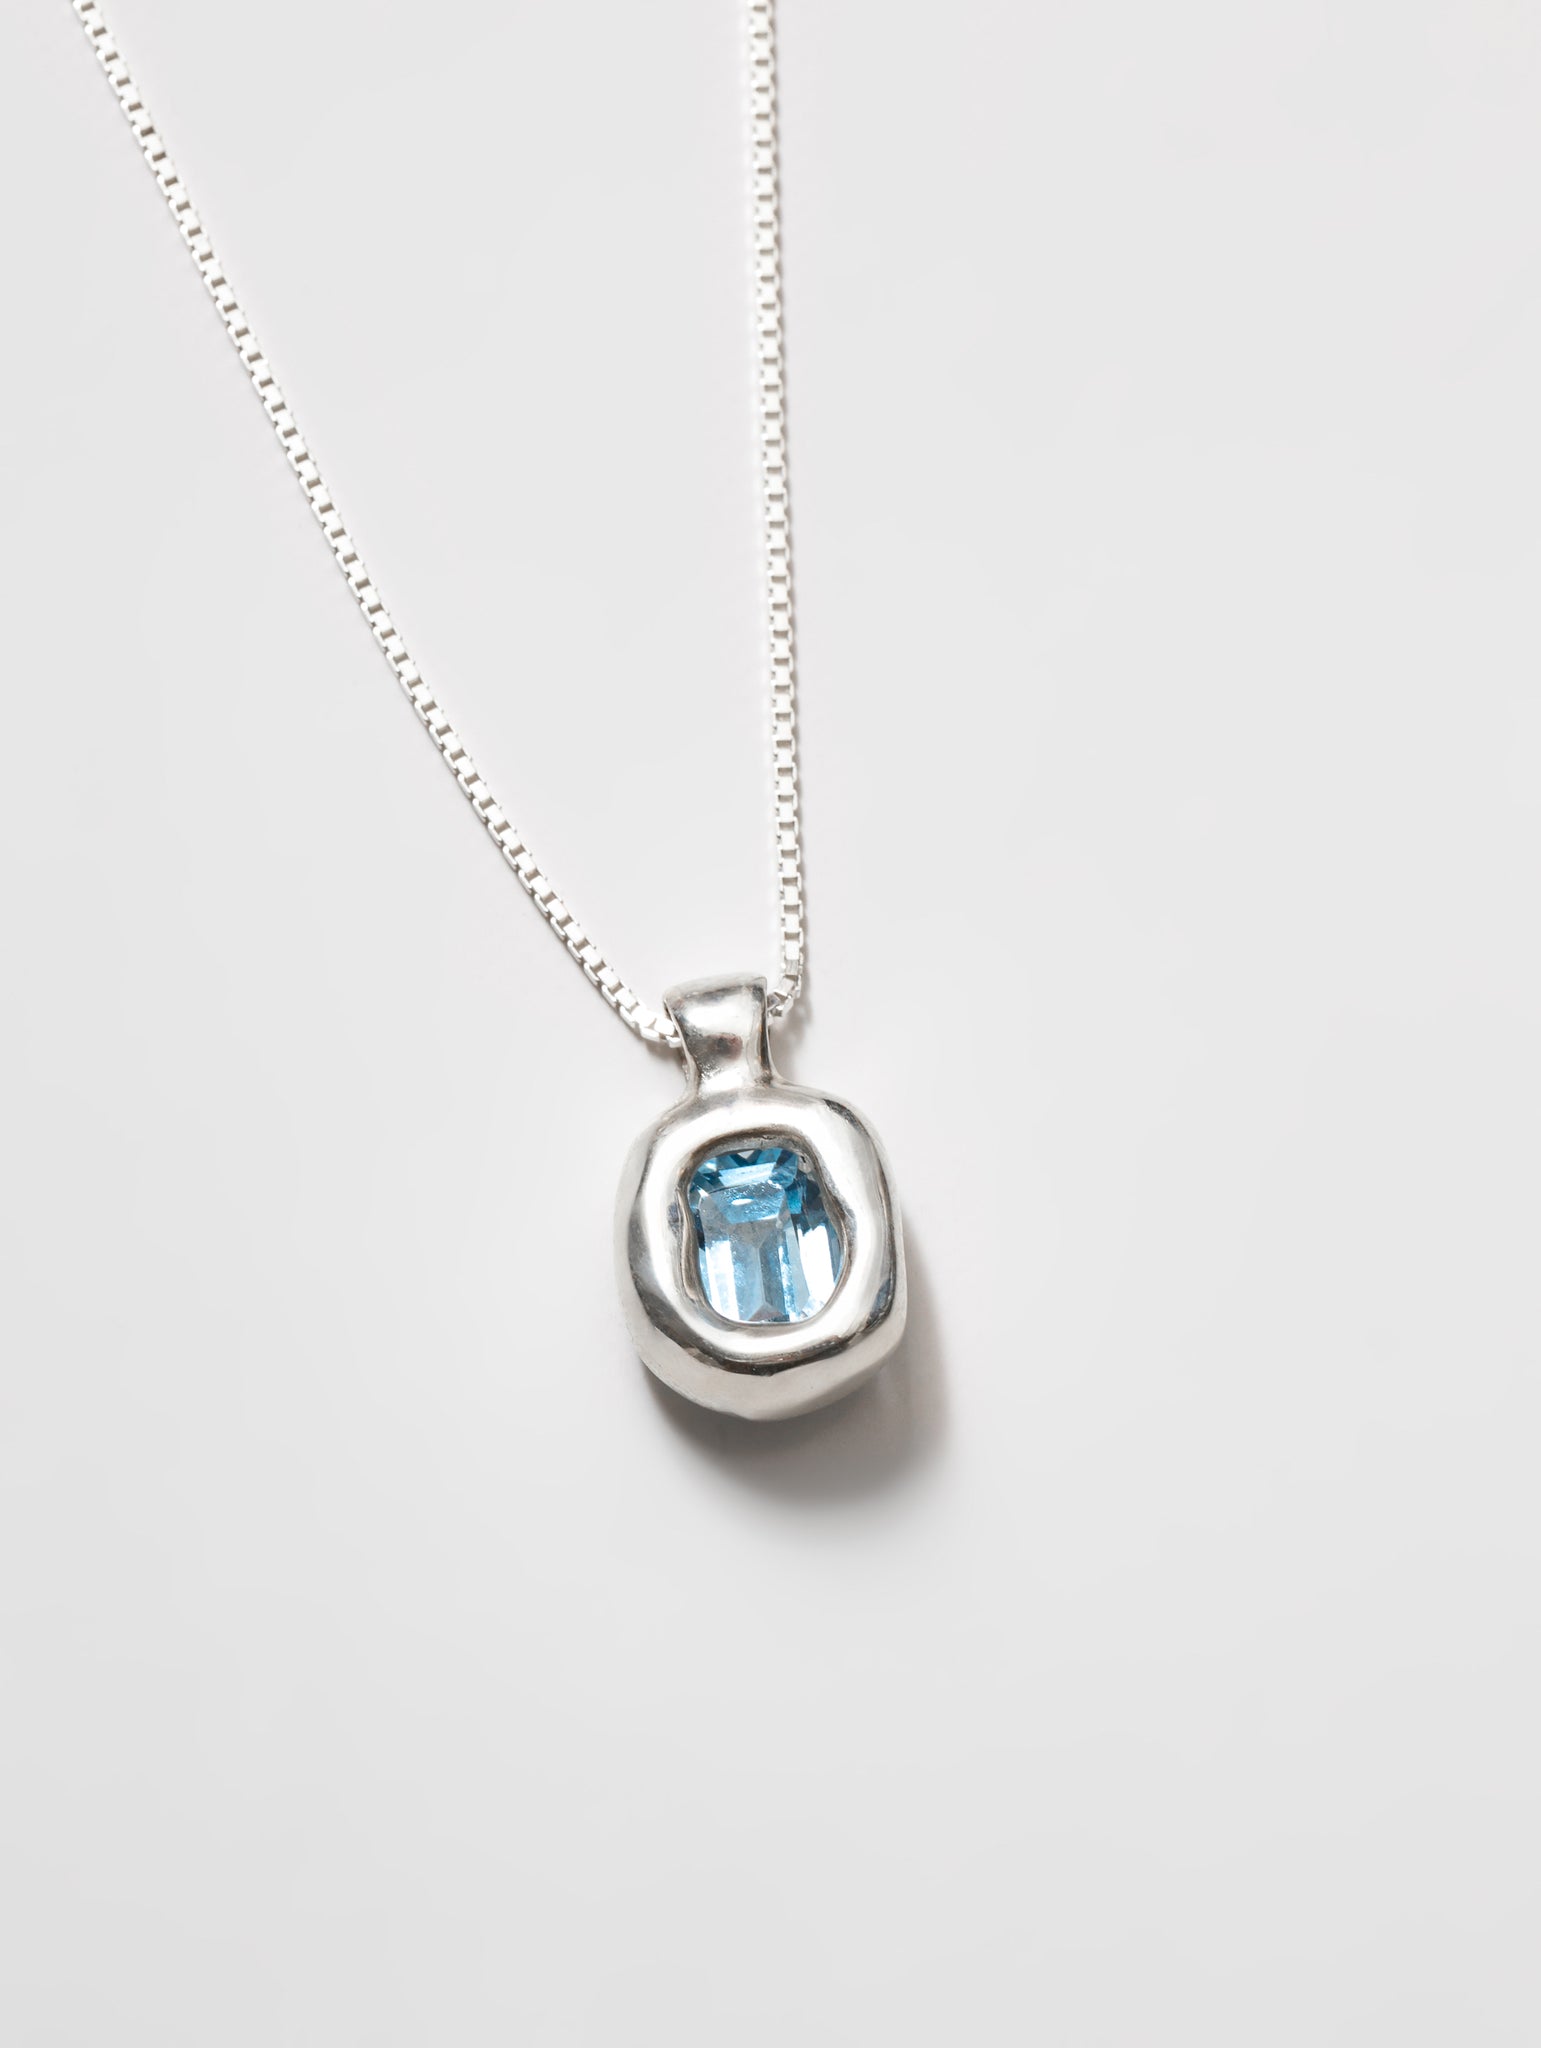 Freya Necklace in Blue and Sterling Silver